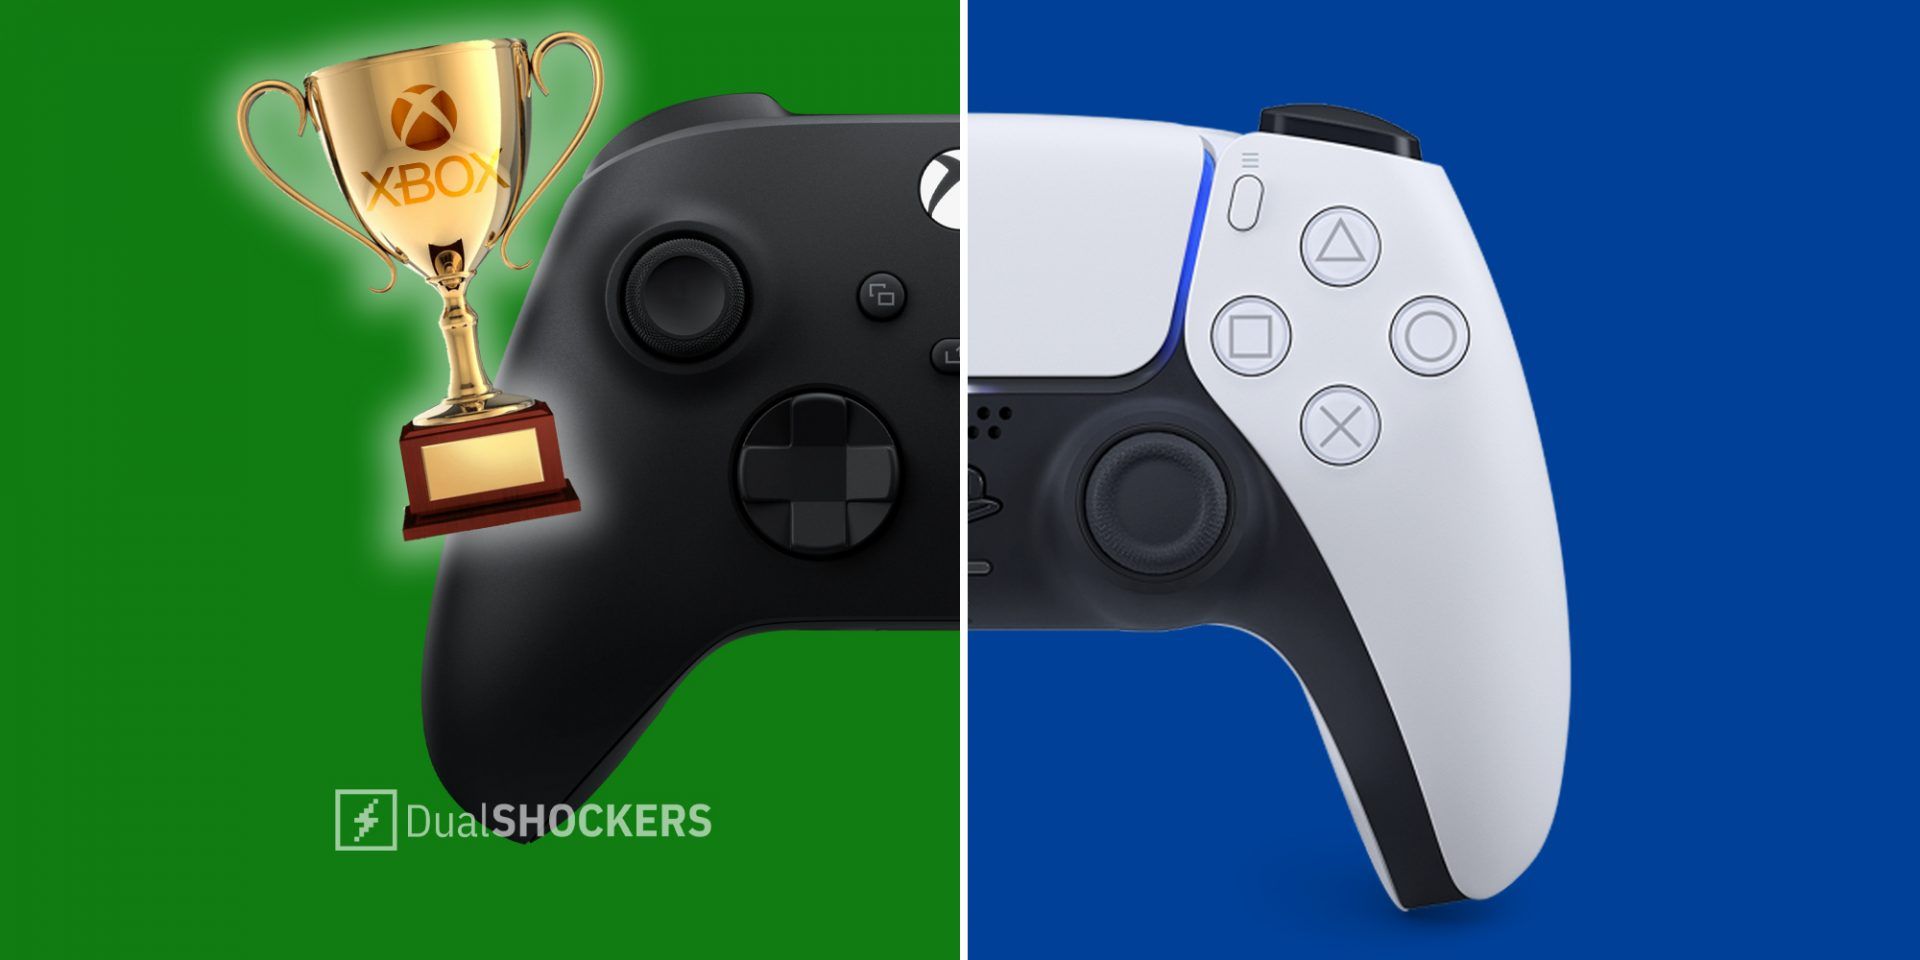 Xbox Series X controller and trophy on left, Playstation 5 controller on right